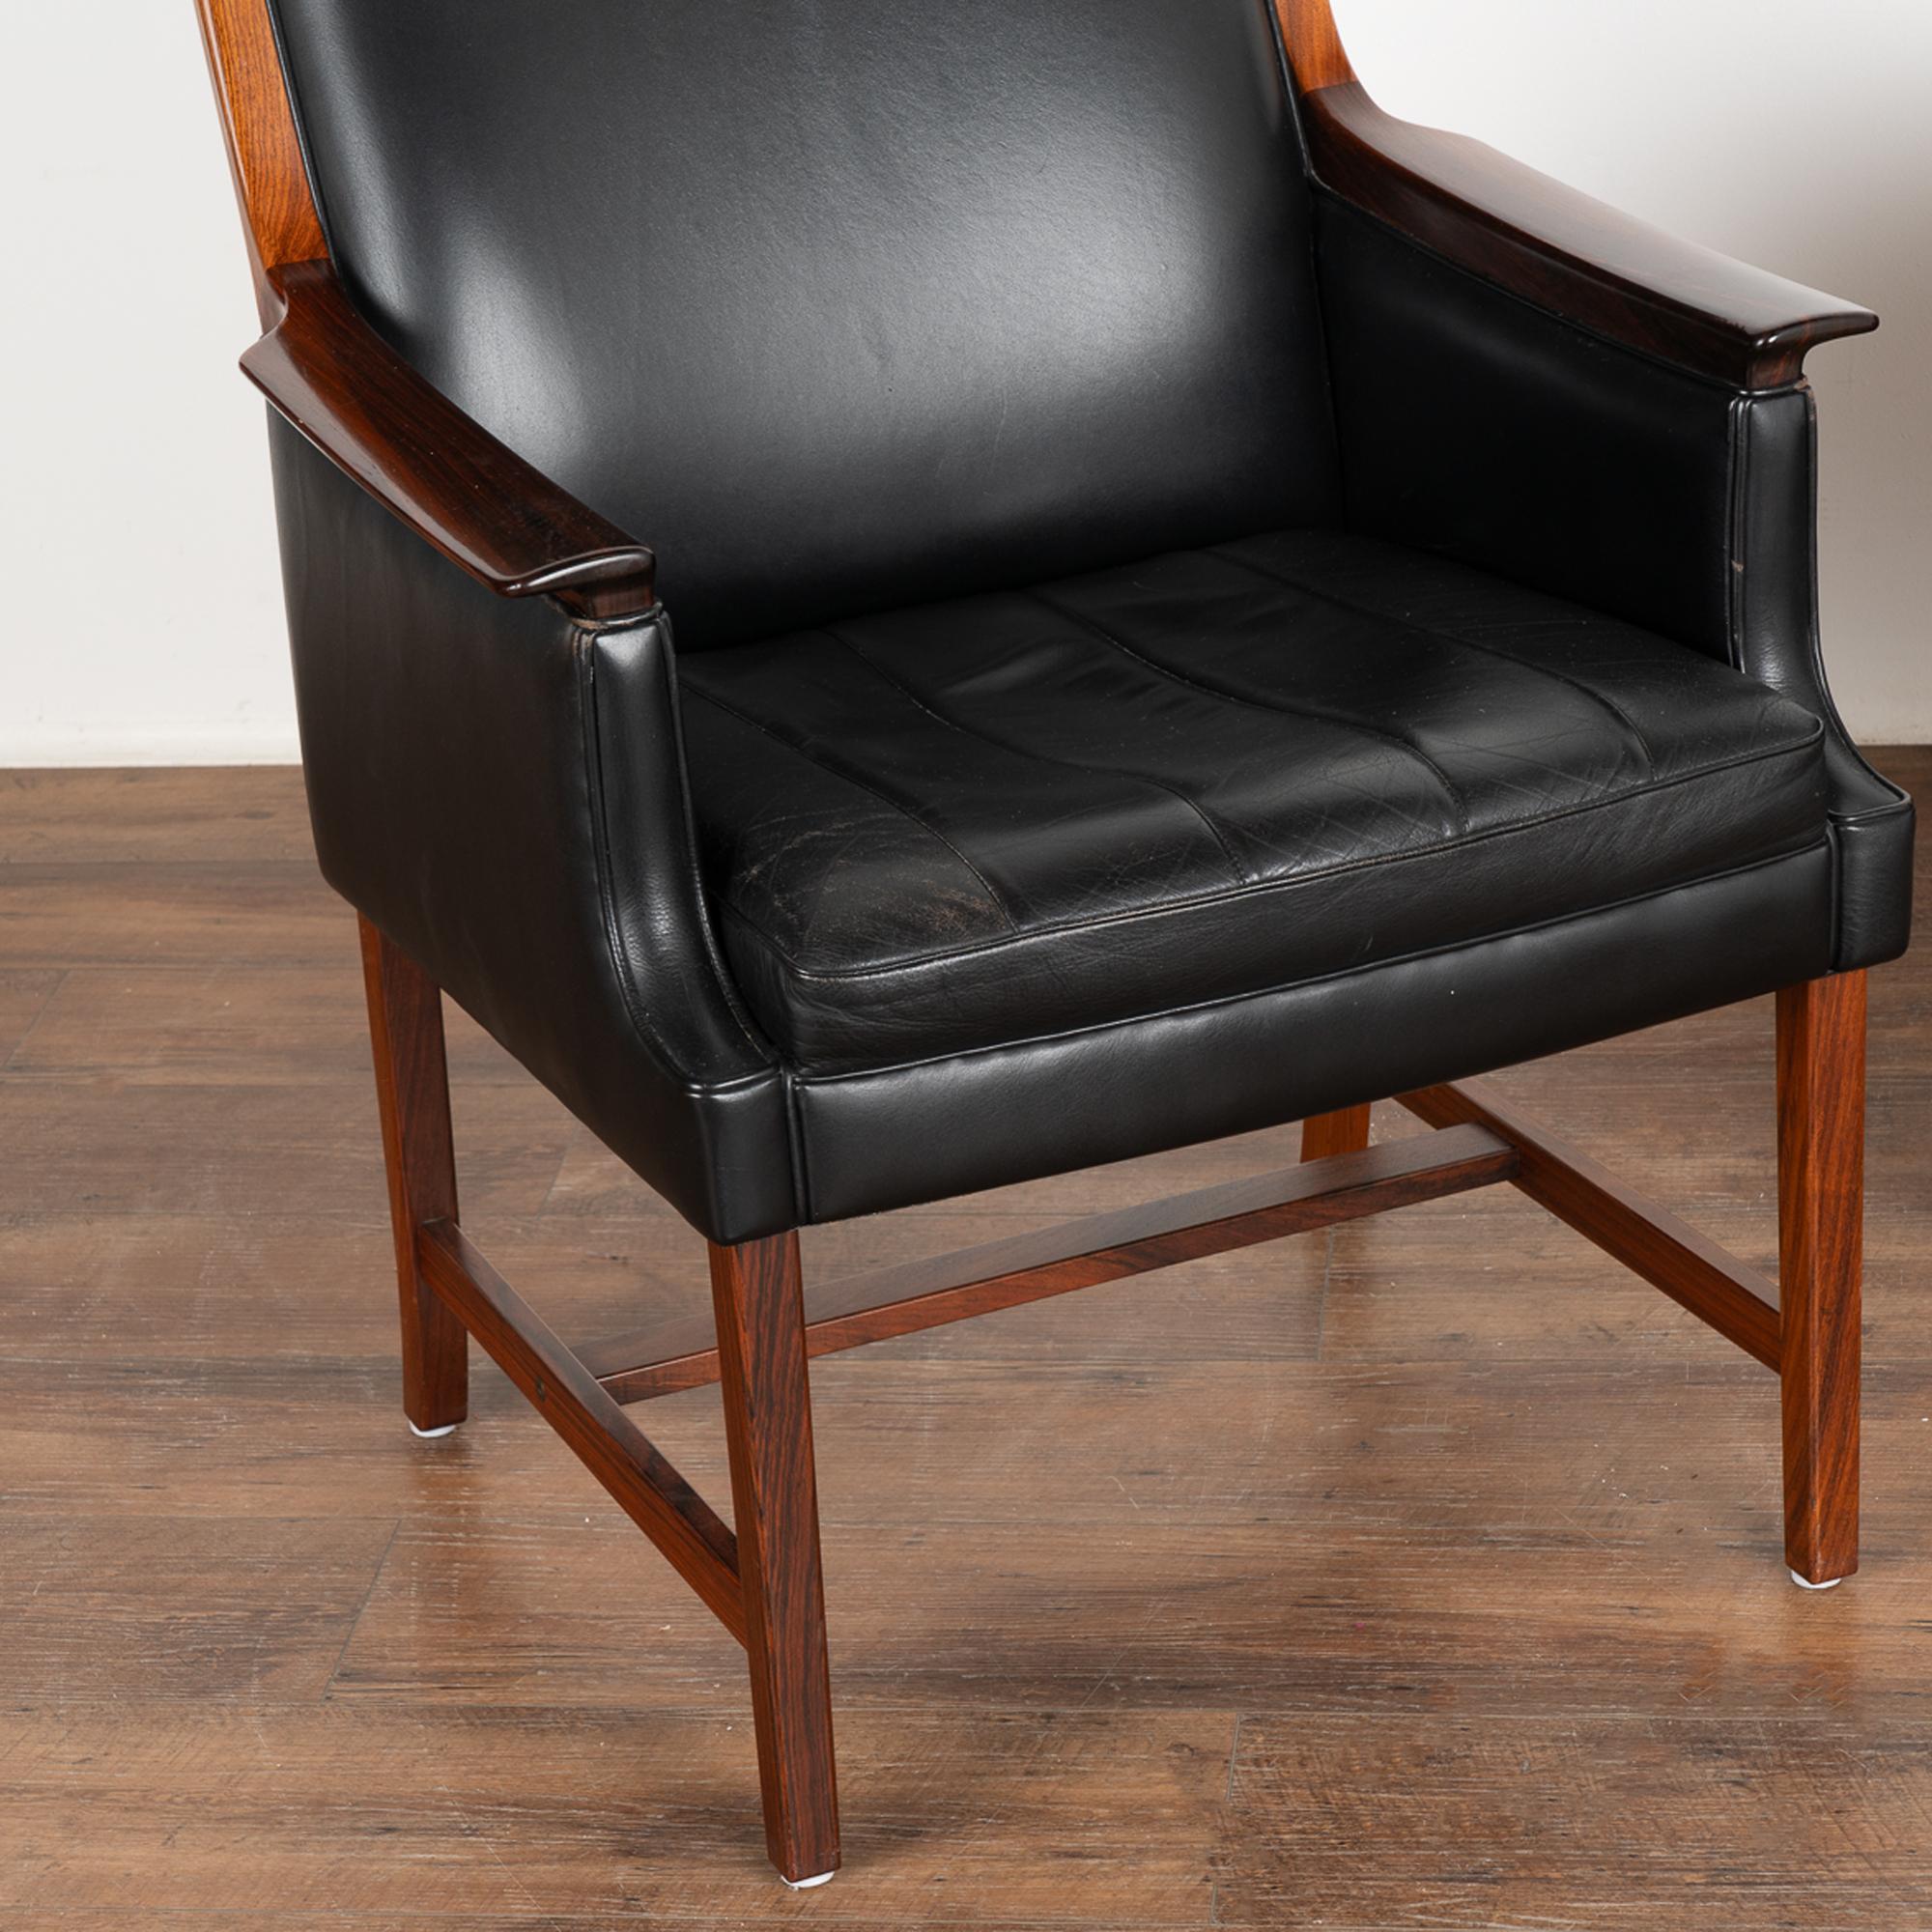 Norwegian Set of 6 Mid Century Black Leather Chairs by Torbjørn Afdal, Norway circa 1970 For Sale